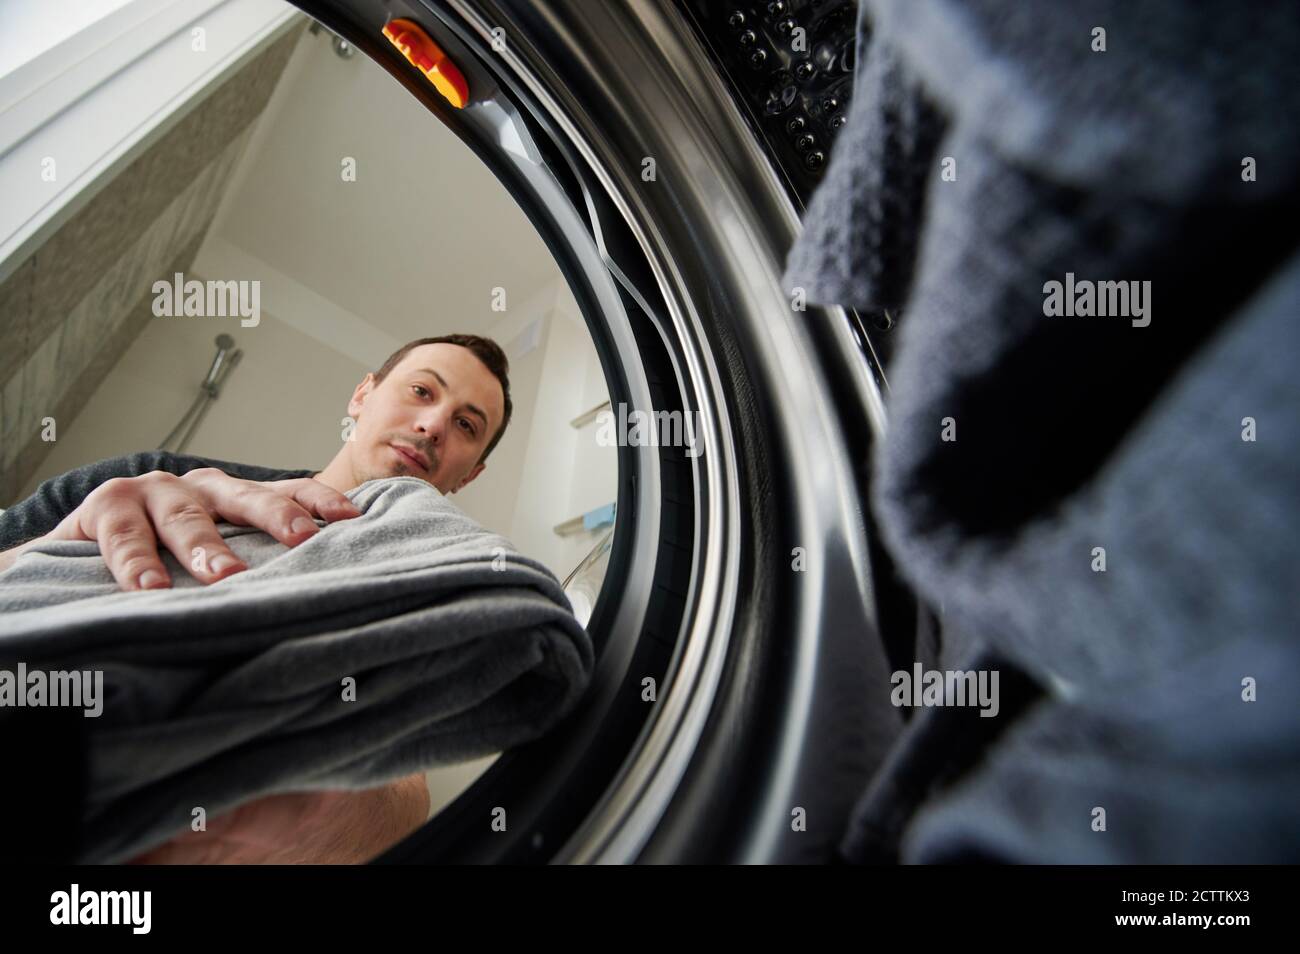 Young man using washing machine view from inside Stock Photo